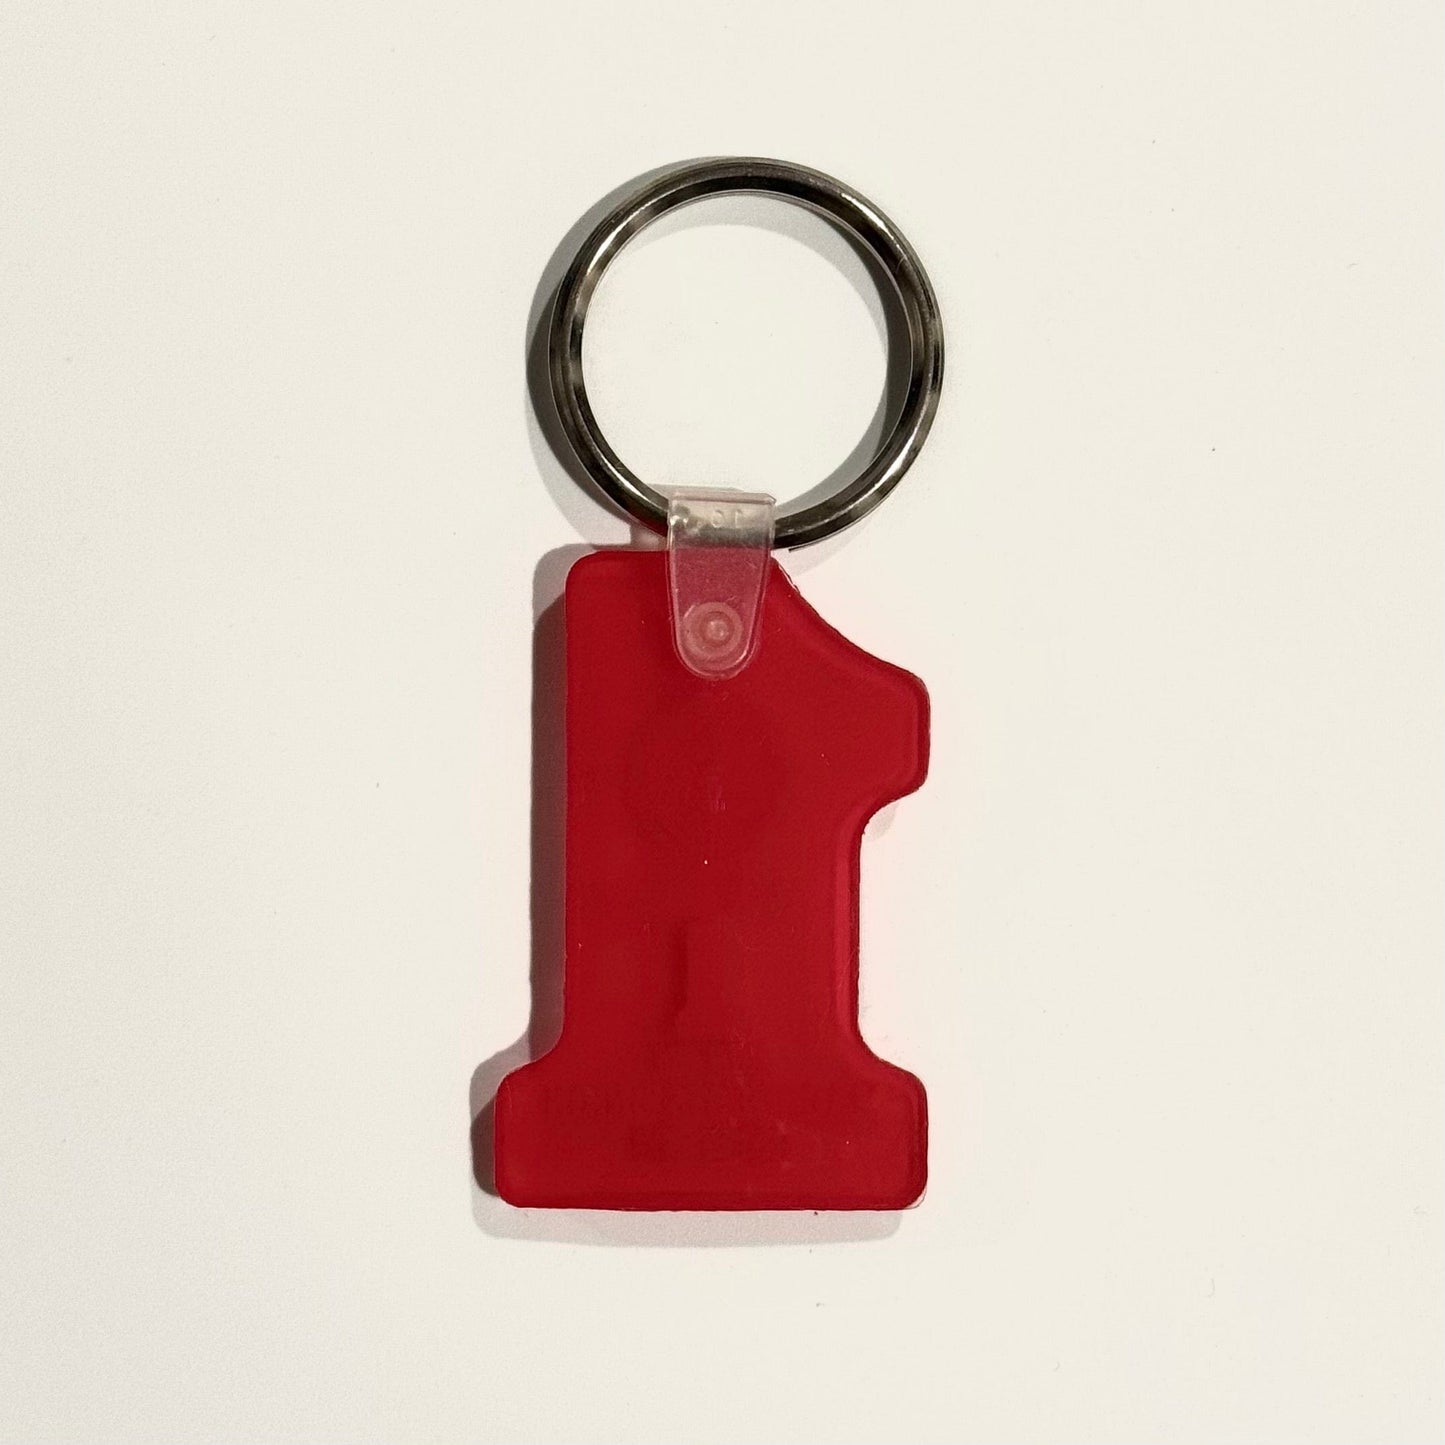 Vintage ‘IAM - Machinists’ Keychain Key Ring Red Soft Touch #1, Local 828